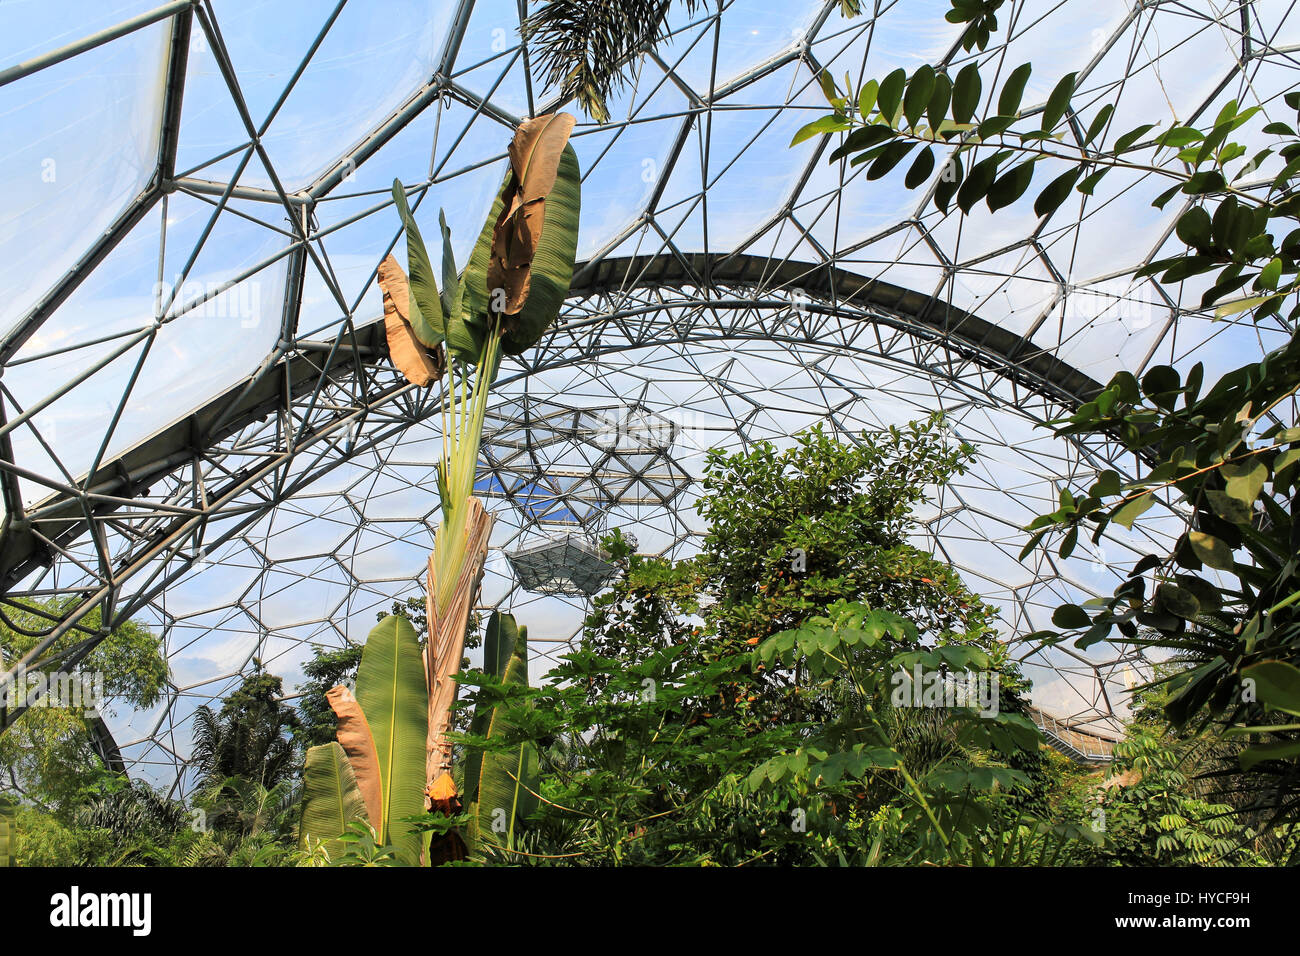 Eden Project, Cornwall, England – August 24, 2010: The world's largest rainforest in captivity with steamy jungles and waterfalls. Educational centre. Stock Photo